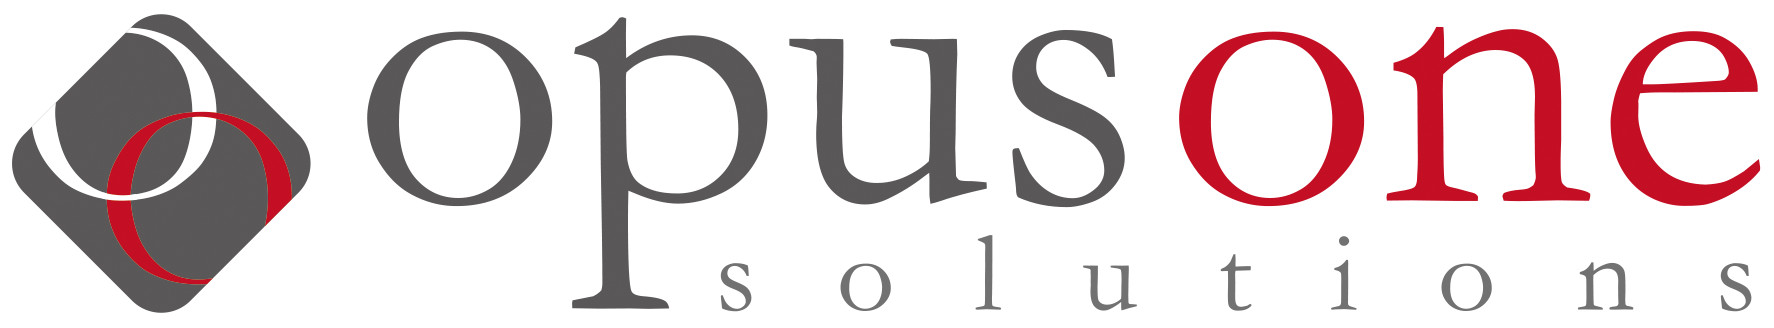 Opus One Solutions R